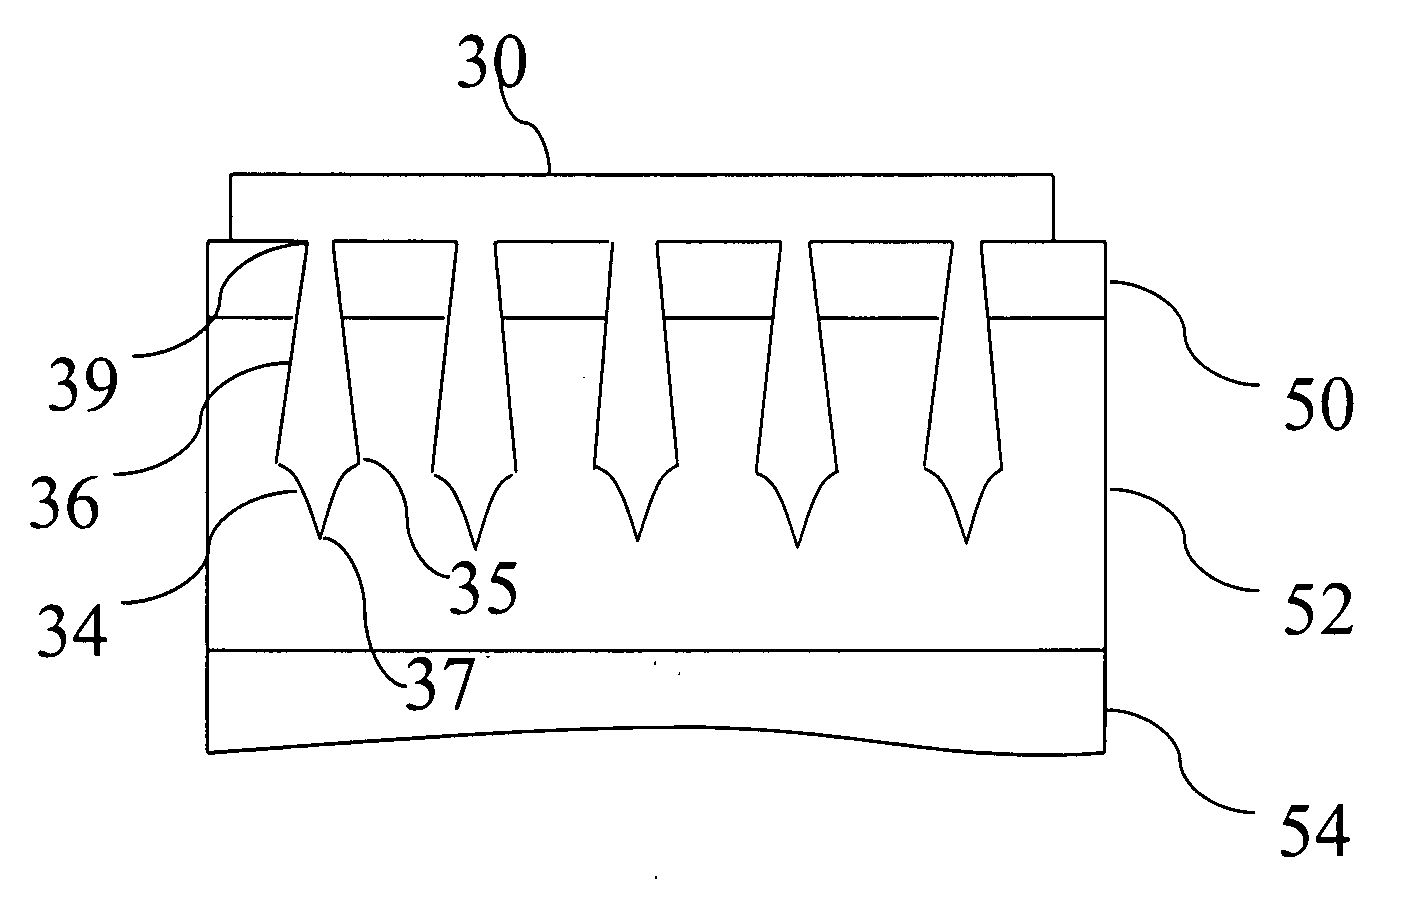 Microprobe array structure and method for manufacturing the same